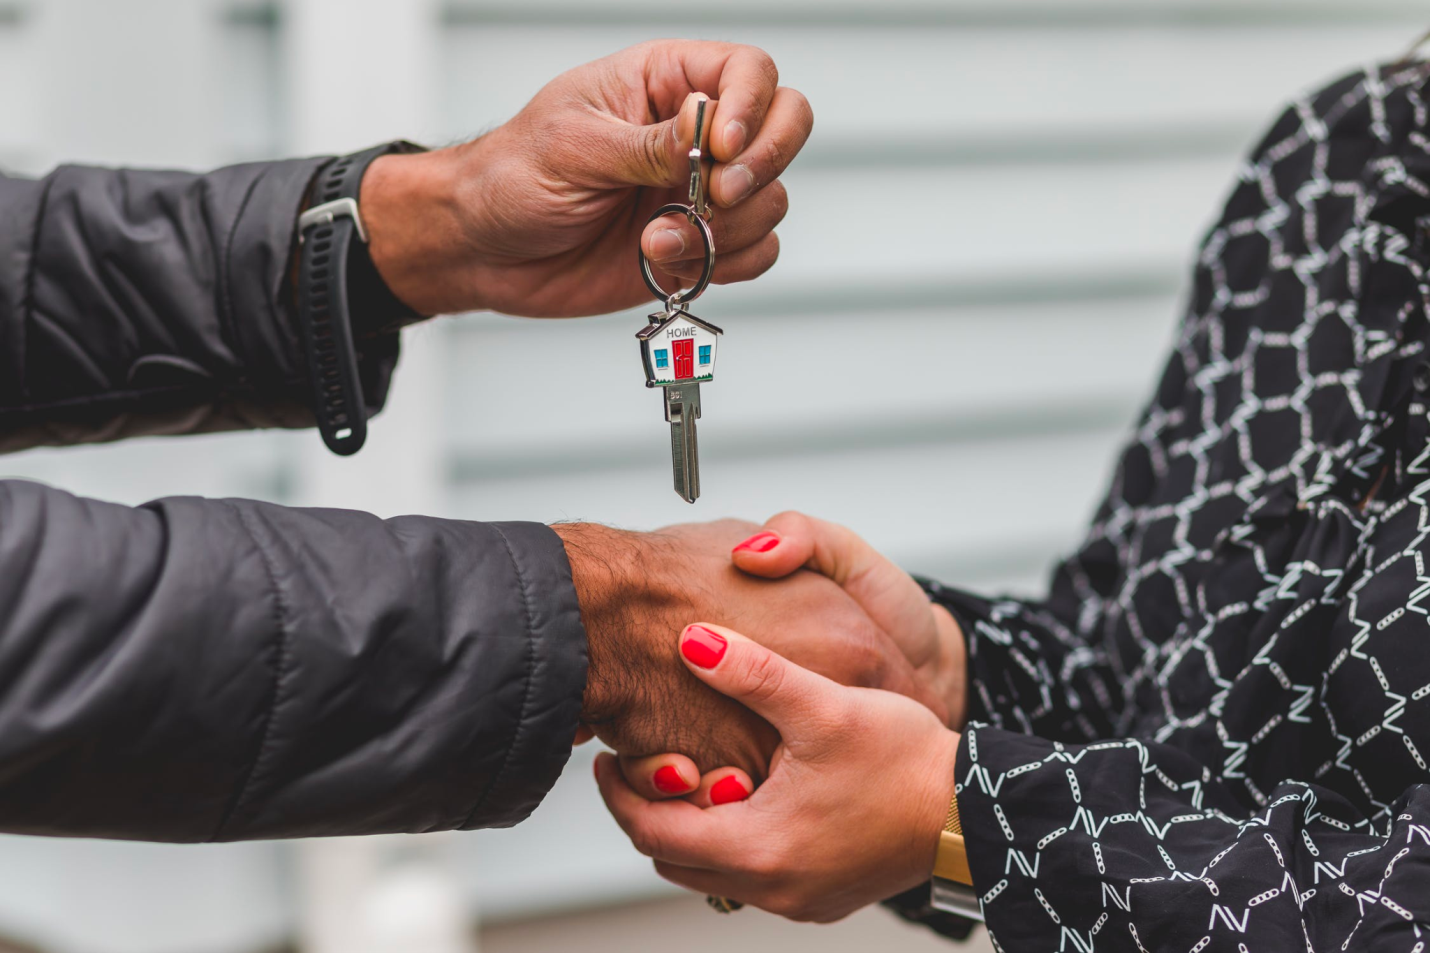 A real estate agent shakes hands with a client who holds a key after a successful closing.